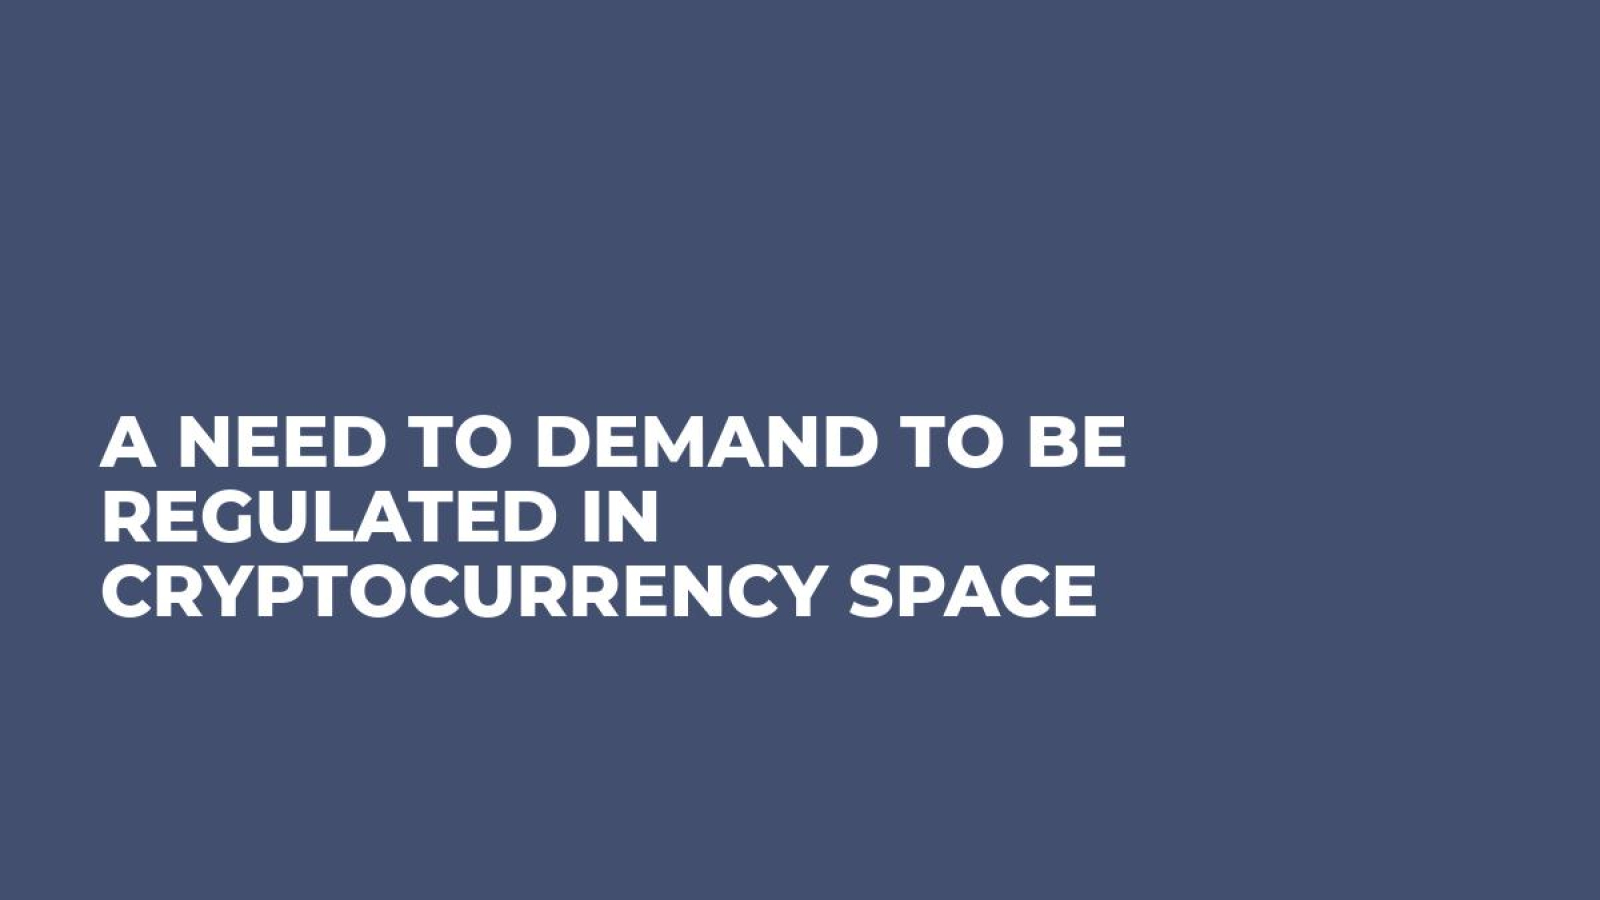 A Need to Demand to be Regulated in Cryptocurrency Space